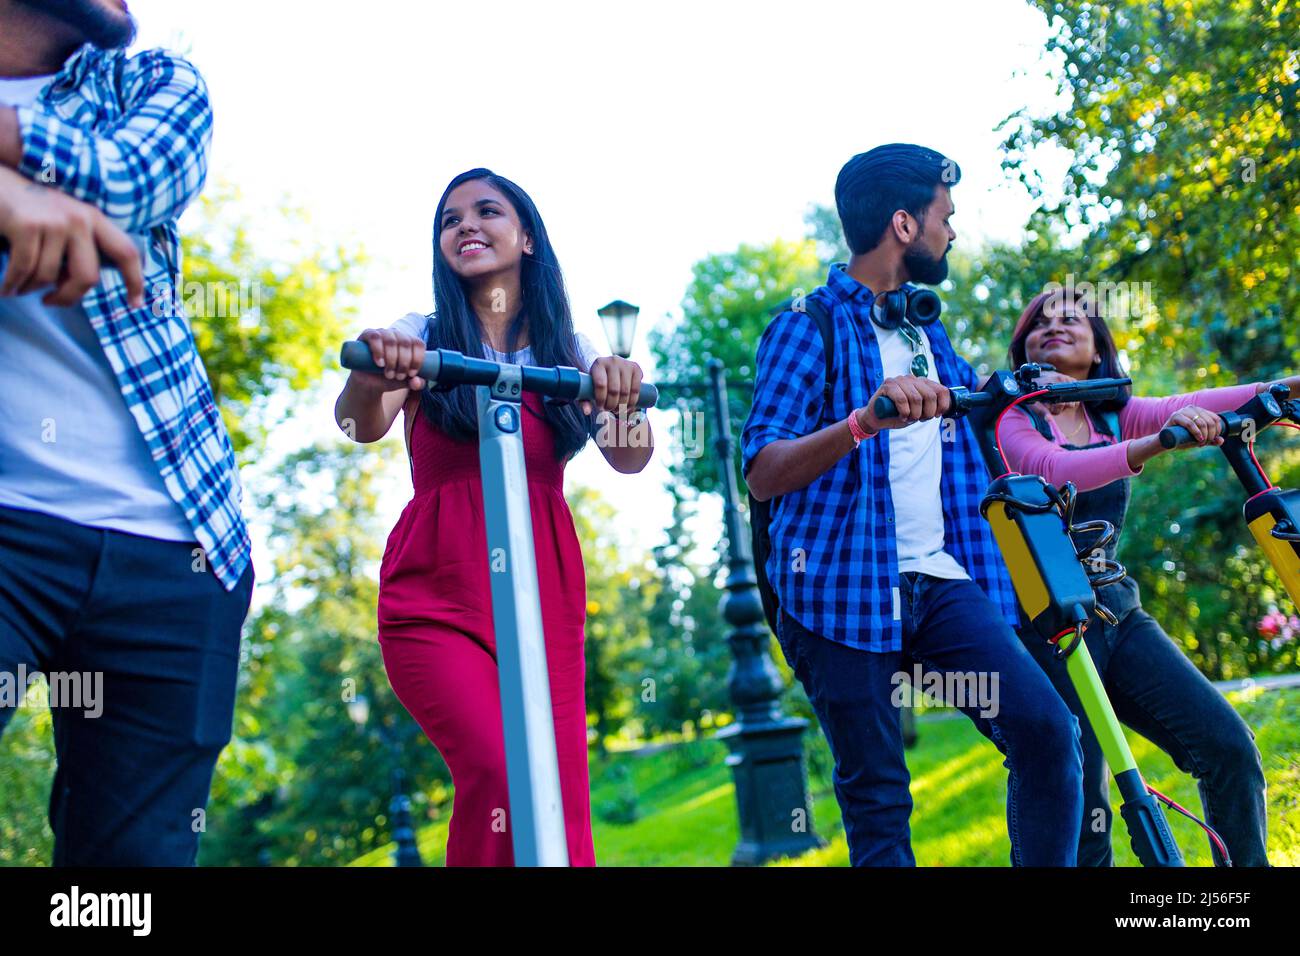 indian ethnicity friendship togetherness in park on sunny day Stock Photo